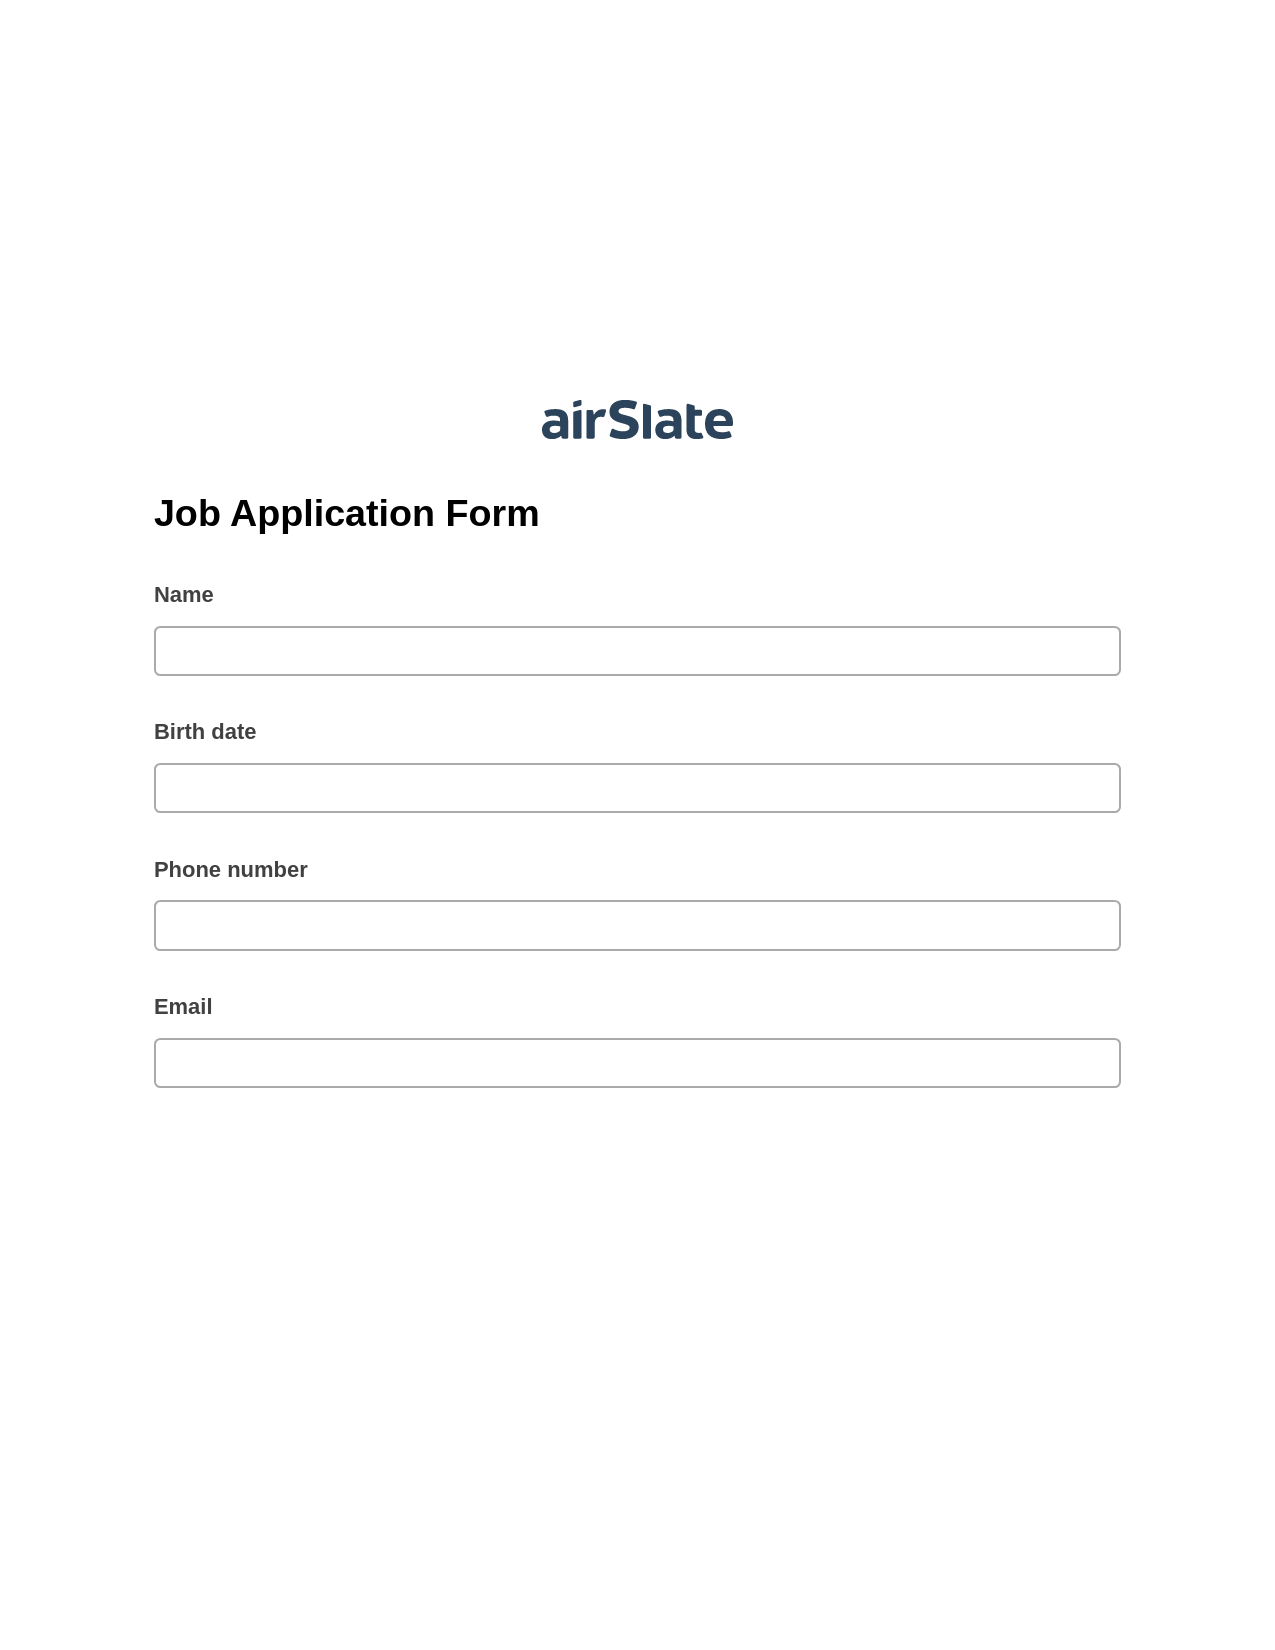 Multirole Job Application Form Pre-fill from Salesforce Records with SOQL Bot, Update NetSuite Records Bot, Export to NetSuite Record Bot